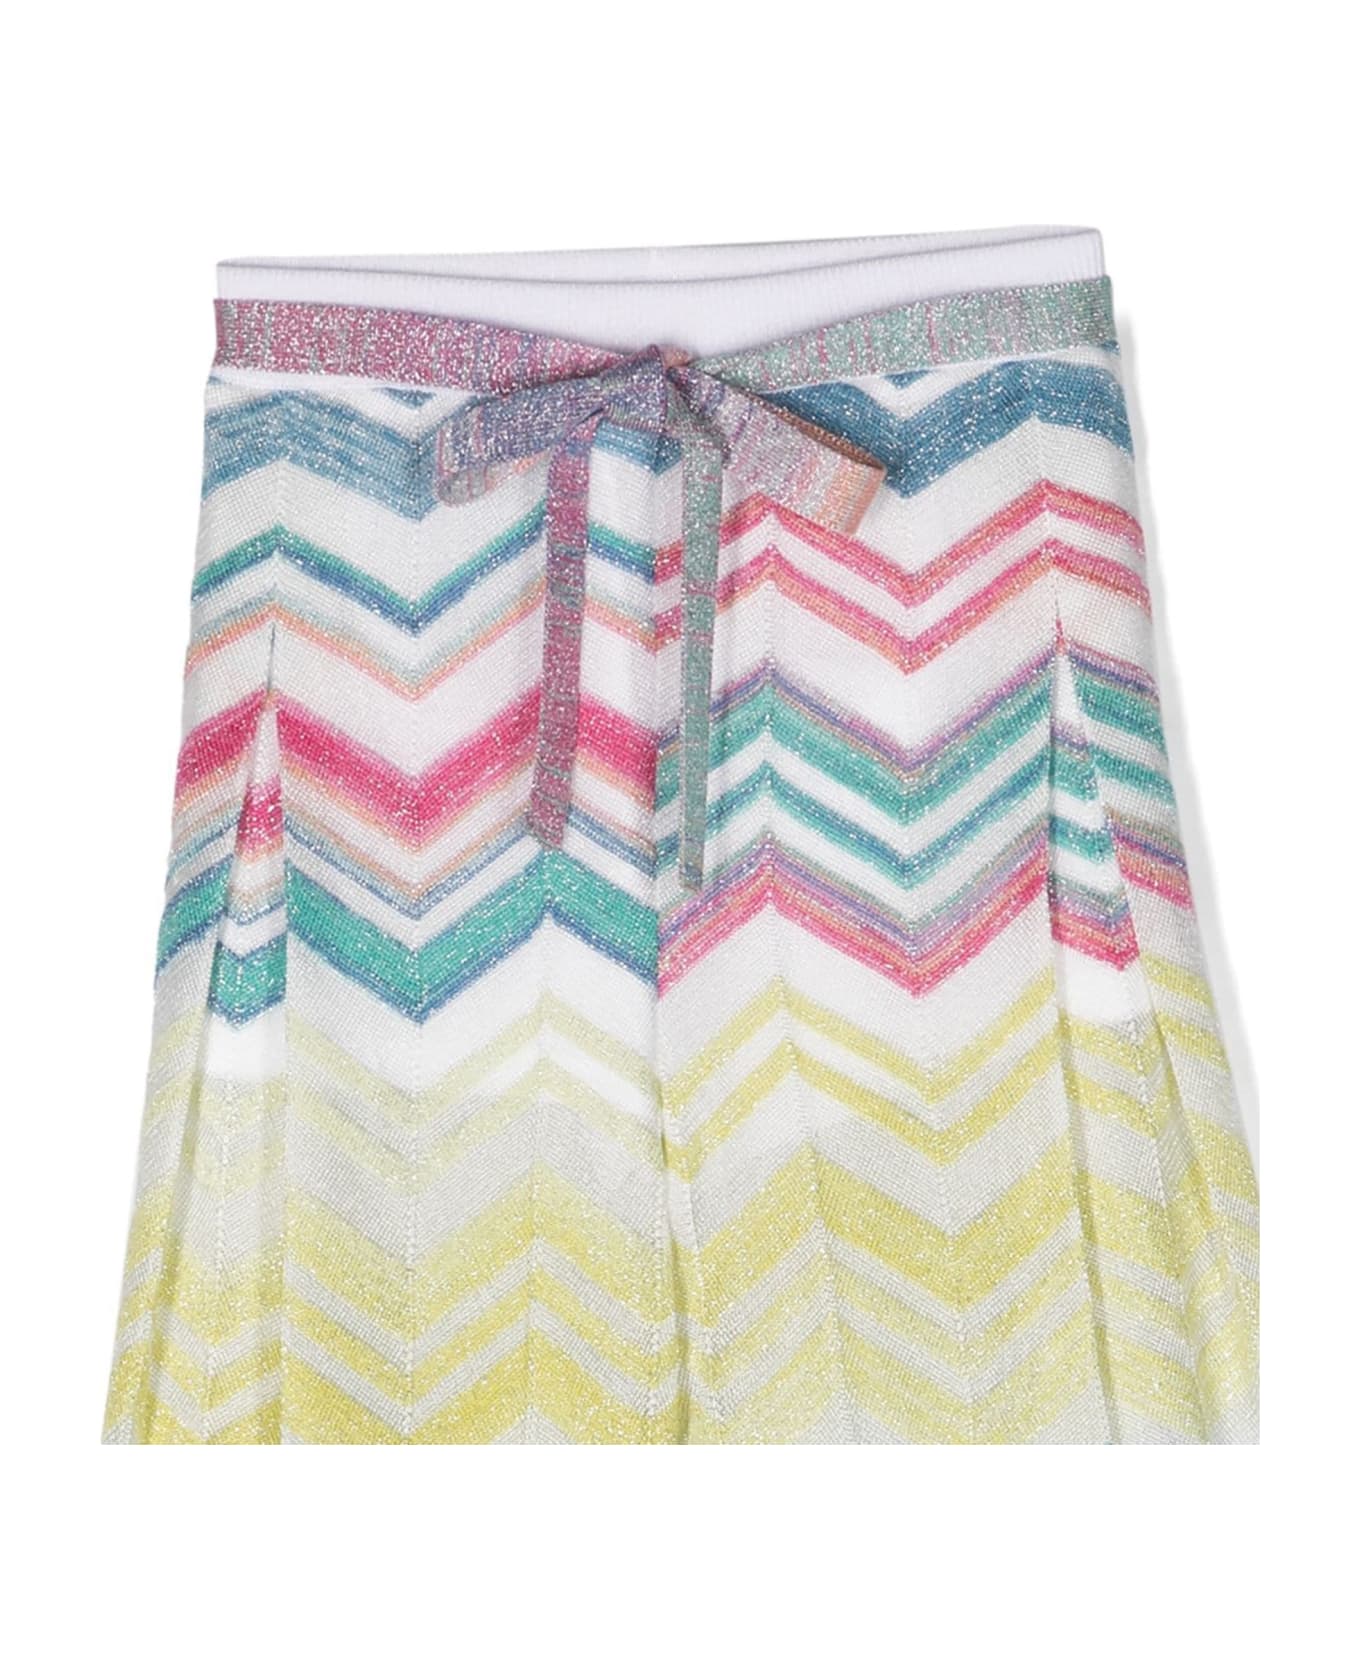 Missoni Kids Multicolor Casual Trousers For Girl With Chevron Pattern - Multicolor